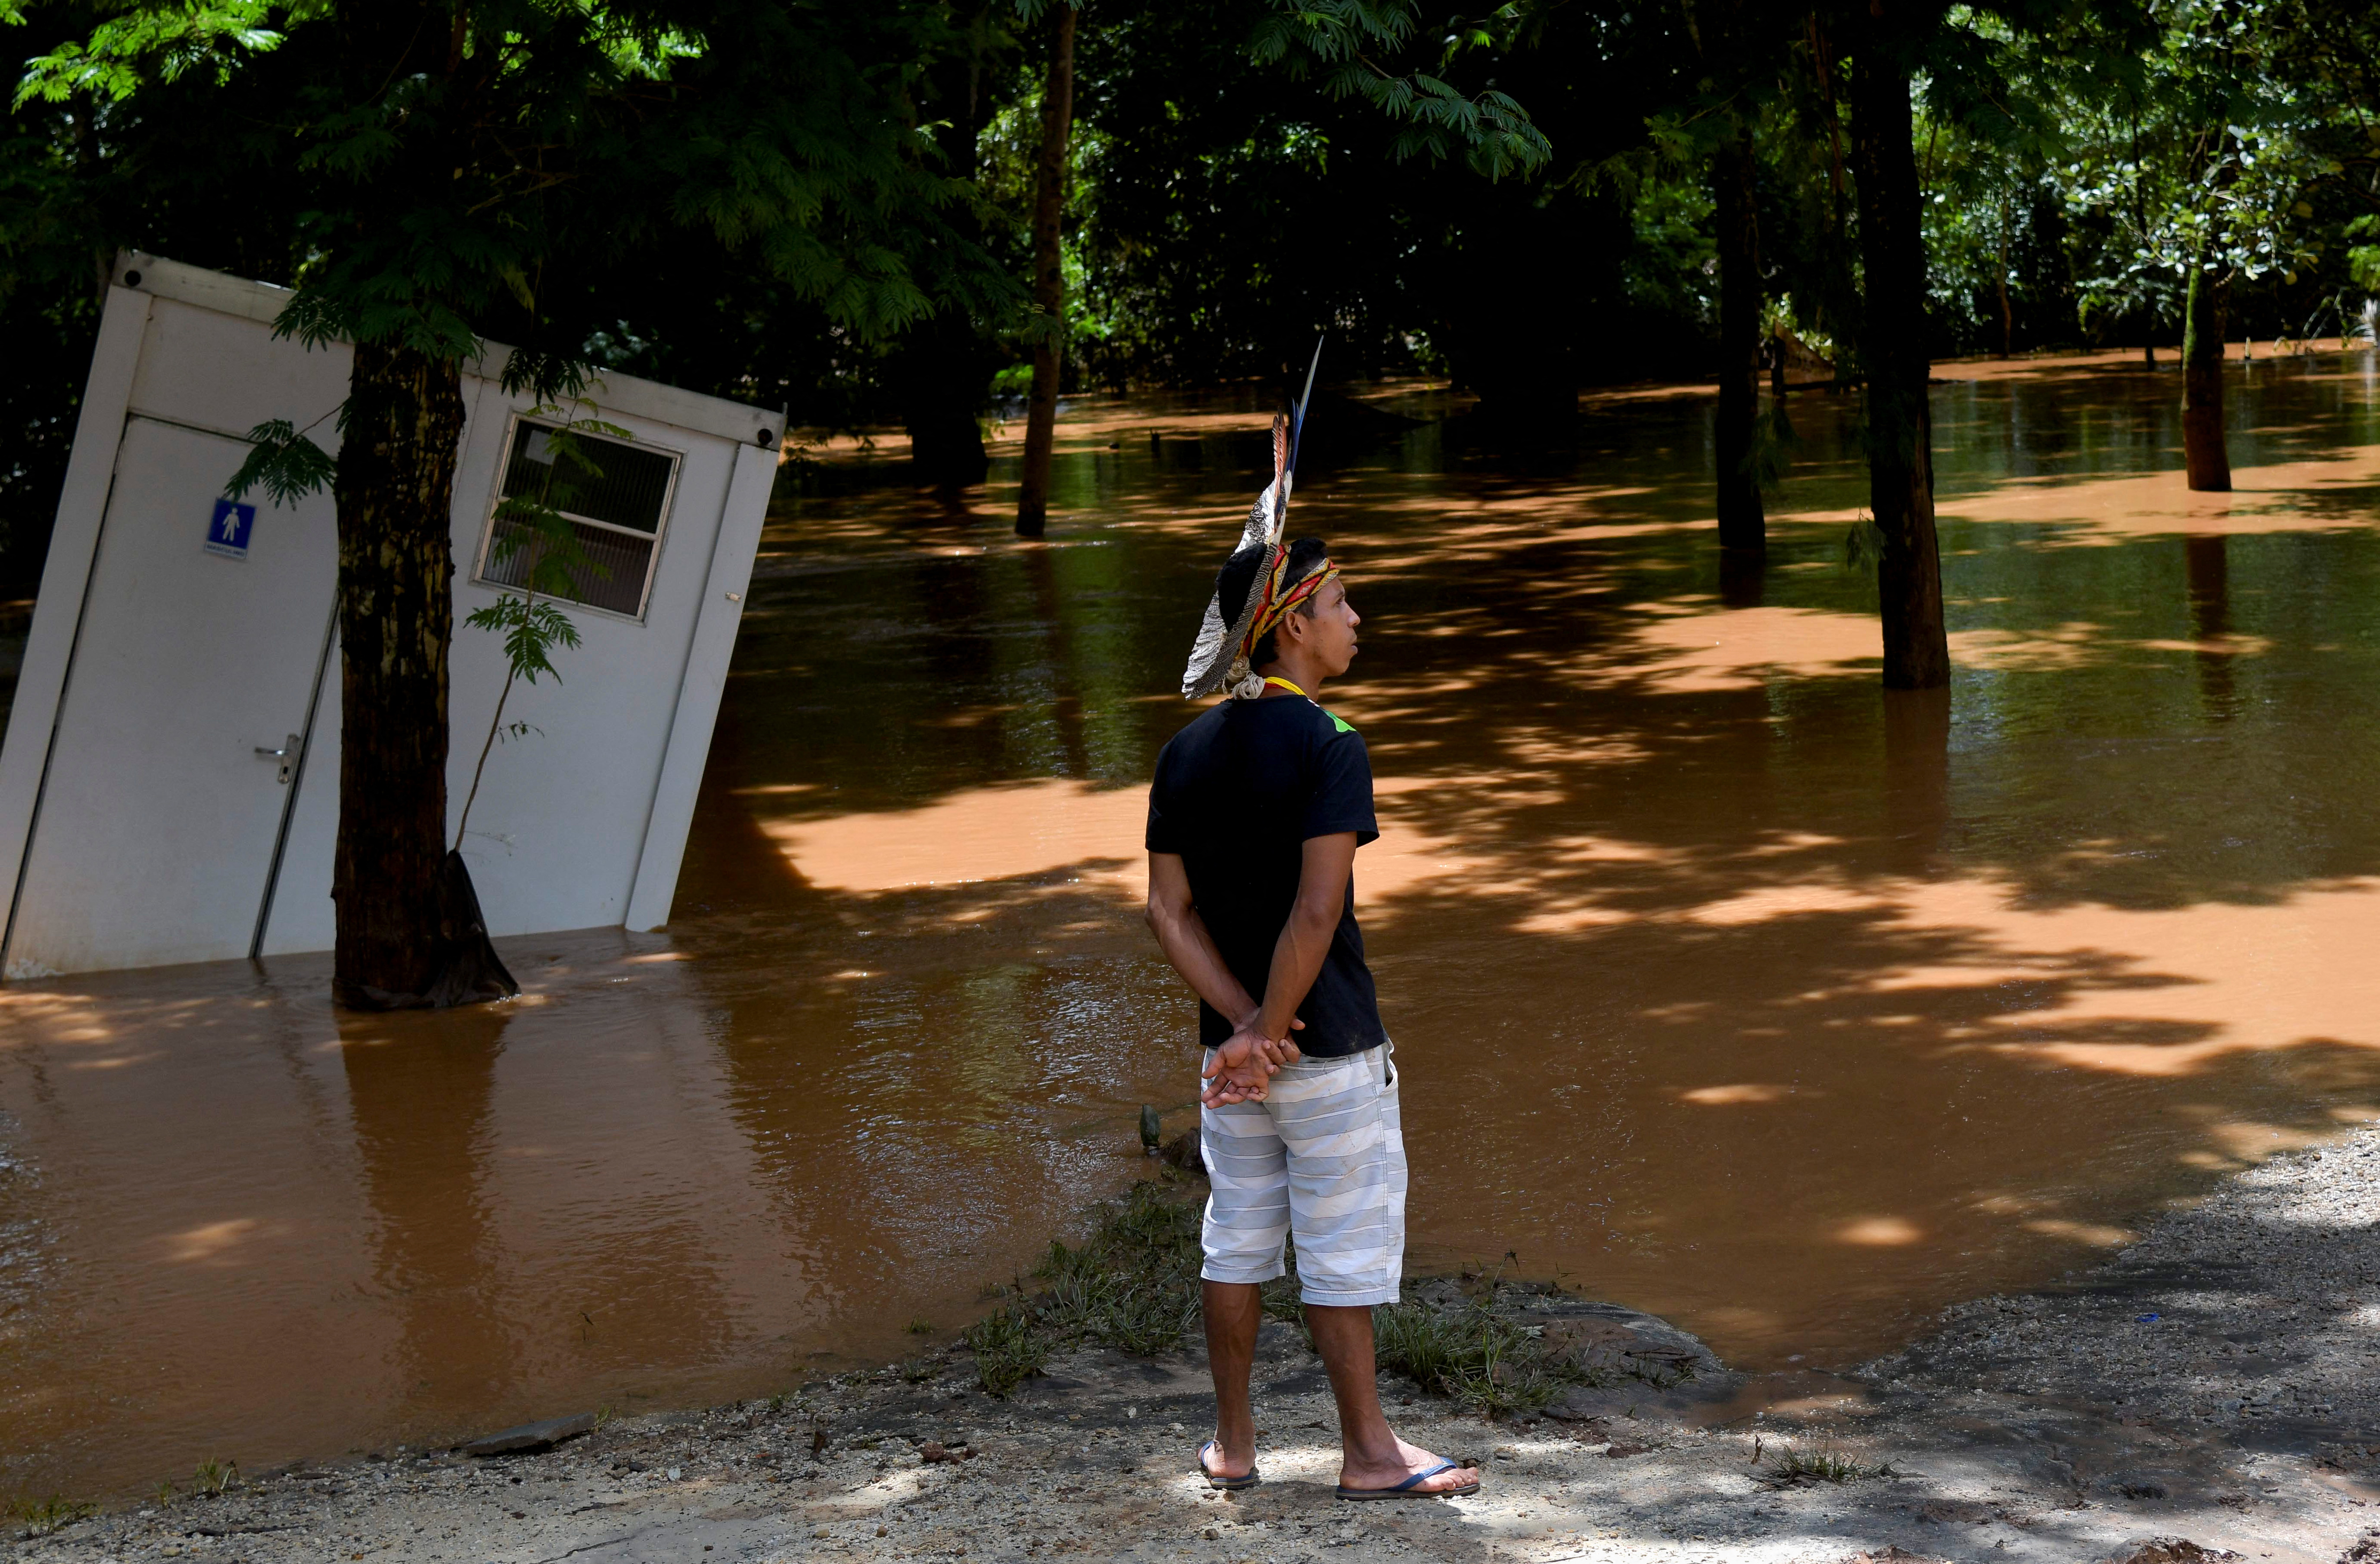 Indigenous leader Vice Cacique Sucupira of the Pataxo ethnicity observes flooding in Nao Xoha village after pouring rains, in Sao Joaquim de Bicas, Minas Gerais state, Brazil January 12, 2022. REUTERS/Washington Alves